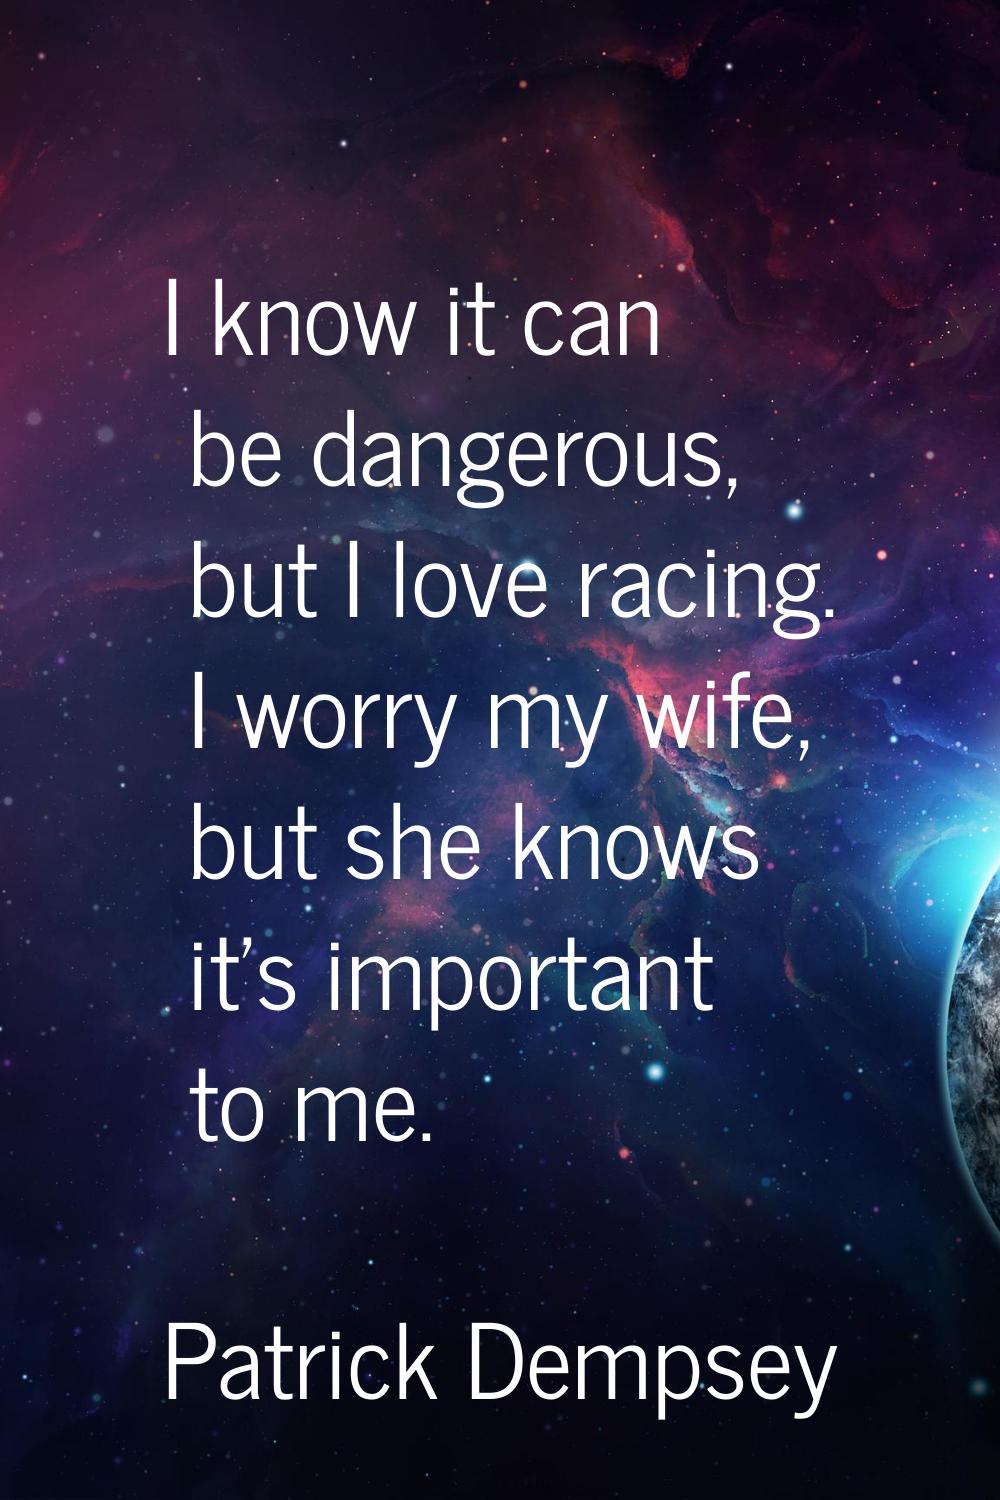 I know it can be dangerous, but I love racing. I worry my wife, but she knows it's important to me.